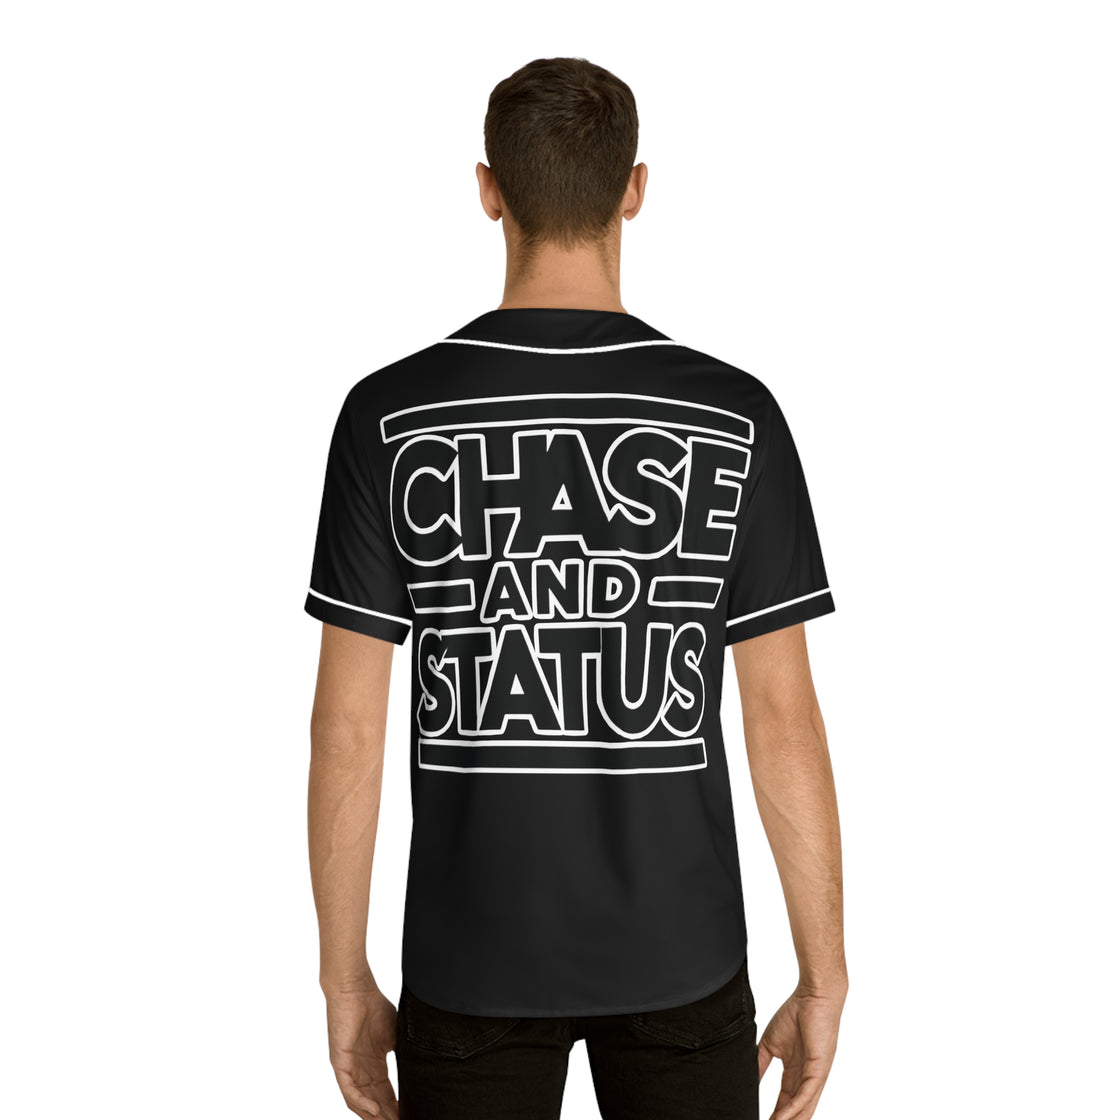 Chase and Statud Jersey Tshirt Rave Shirt Edm